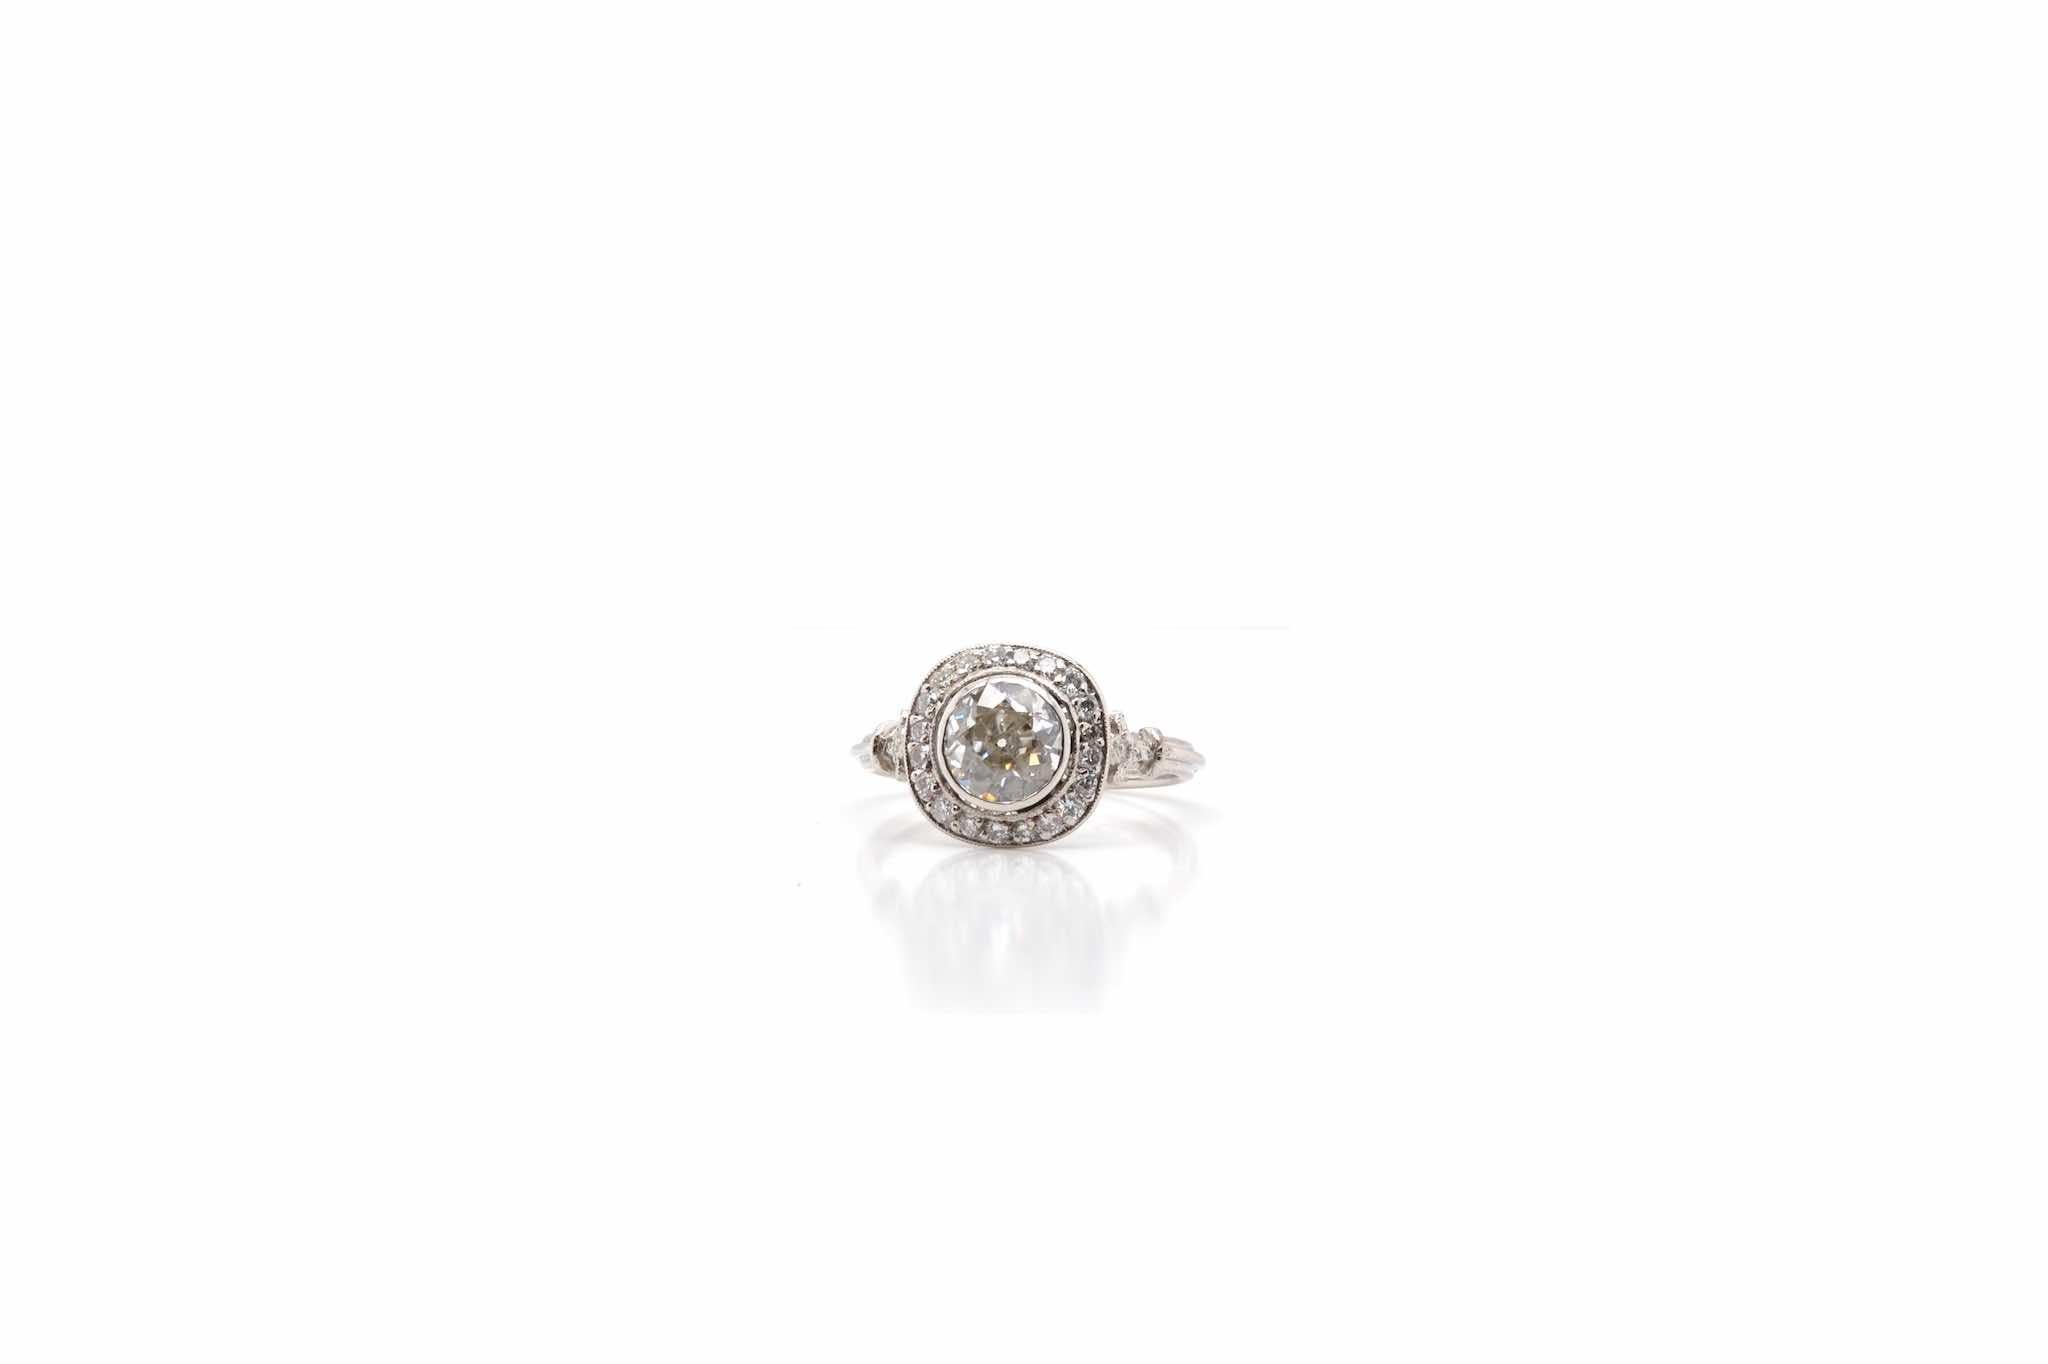 Stones: Old cut diamond of 1 carat VS/J
and surrounded by diamonds with a total weight of 0.38 carats
Material: Platinum
Dimensions: 9mm length on finger
Weight: 4.1g
Size: 52.5 (free sizing)
Certificate
Ref. : 23325 - 24904